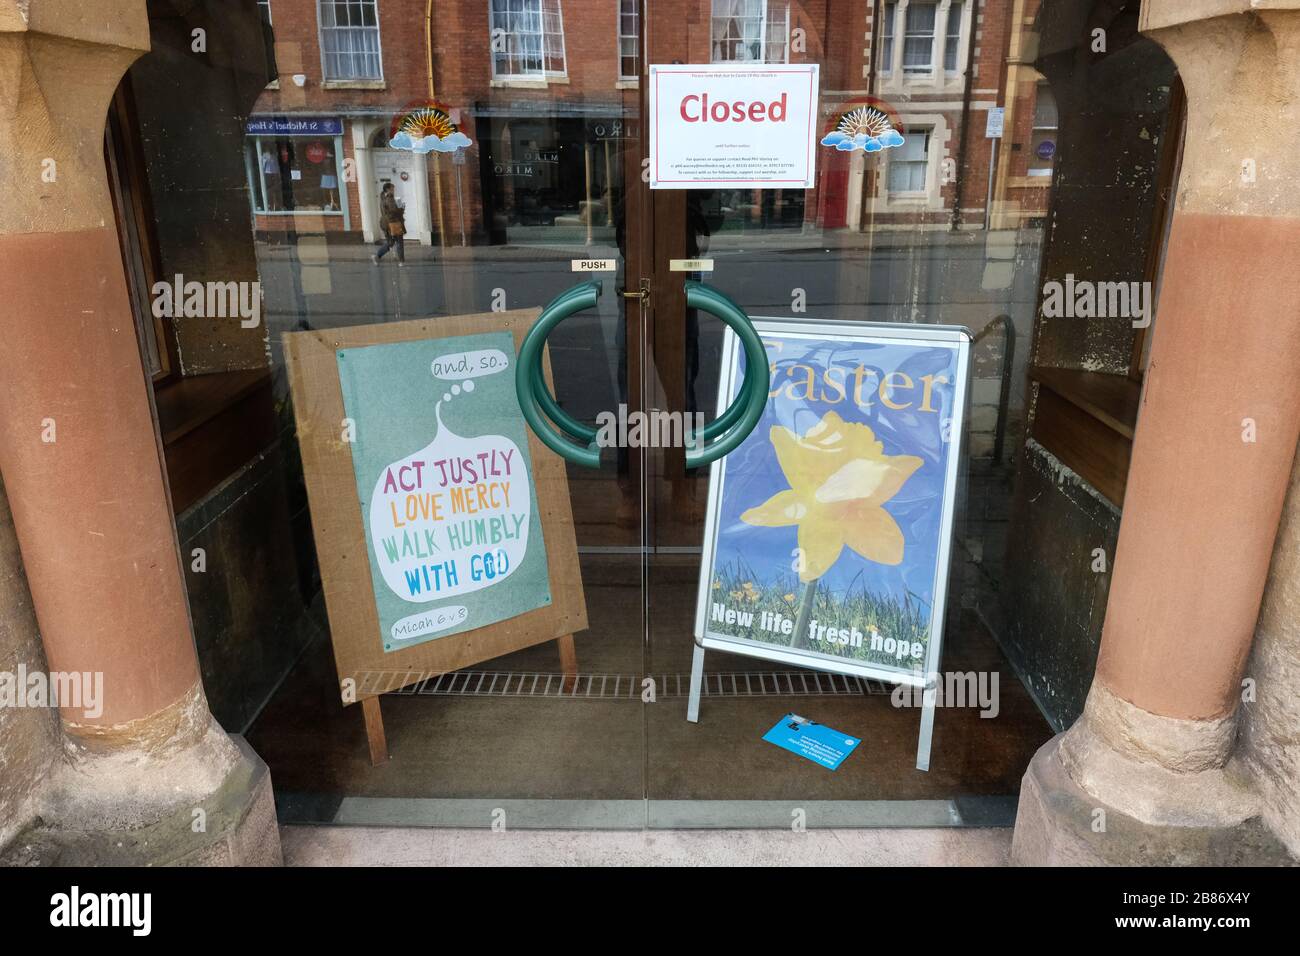 Hereford, Herefordshire, UK - Friday 20th March 2020 - A sign on the entrance to St Johns Methodist Church states it is now closed until further notice due to Covid-19 alongside a poster offering New Life - New Hope at  Easter. Photo Steven May / Alamy Live News Stock Photo